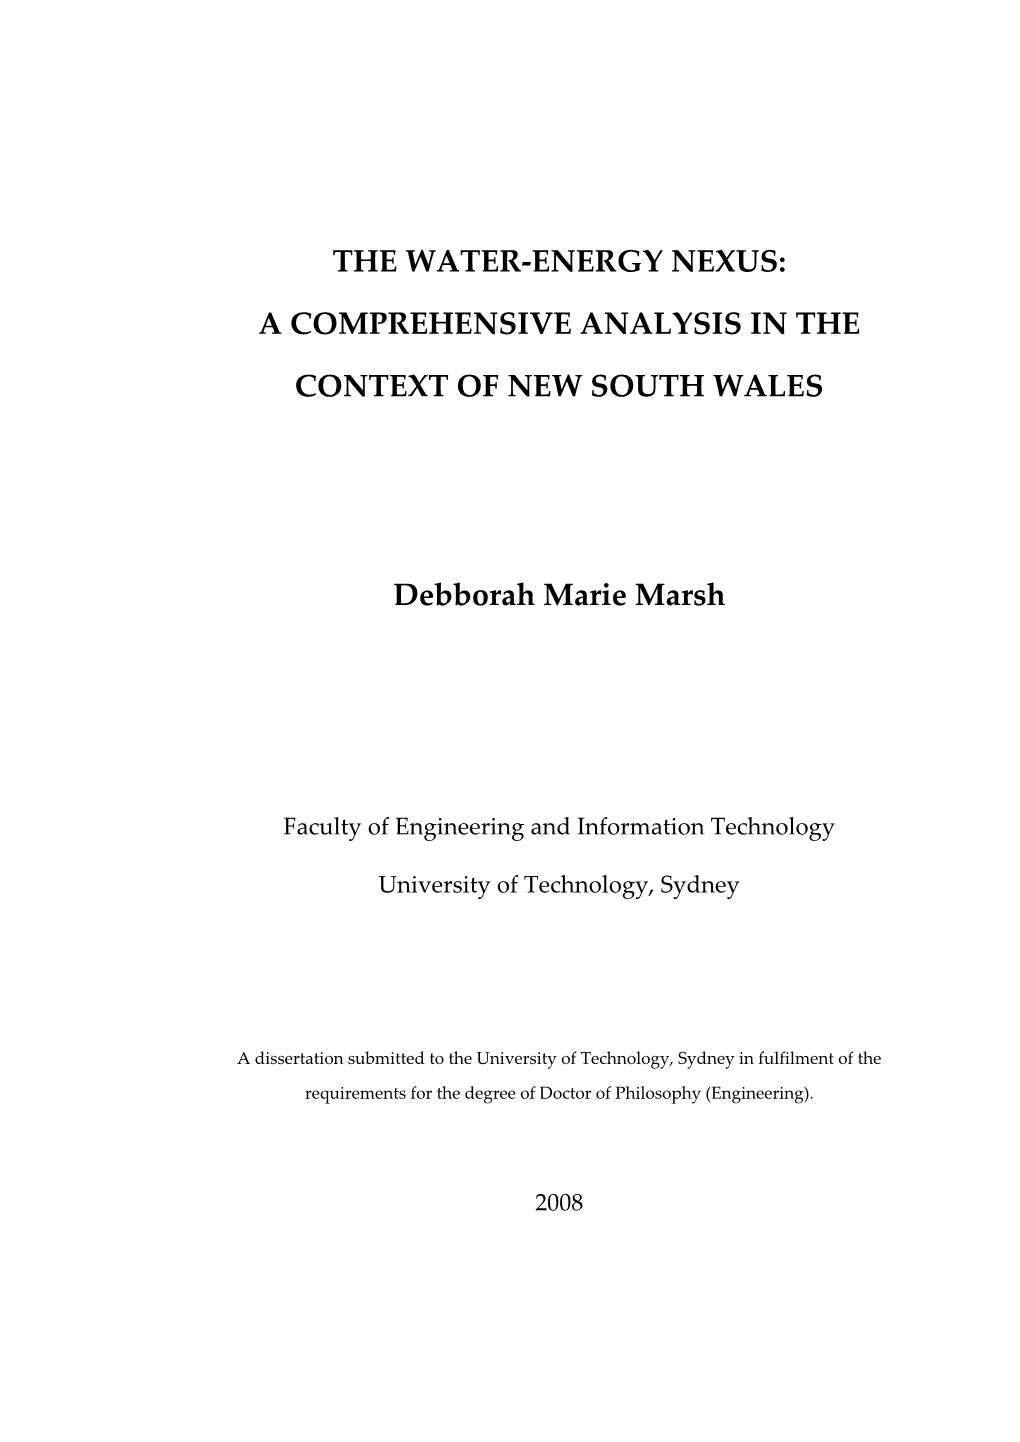 The Water-Energy Nexus: a Comprehensive Analysis In